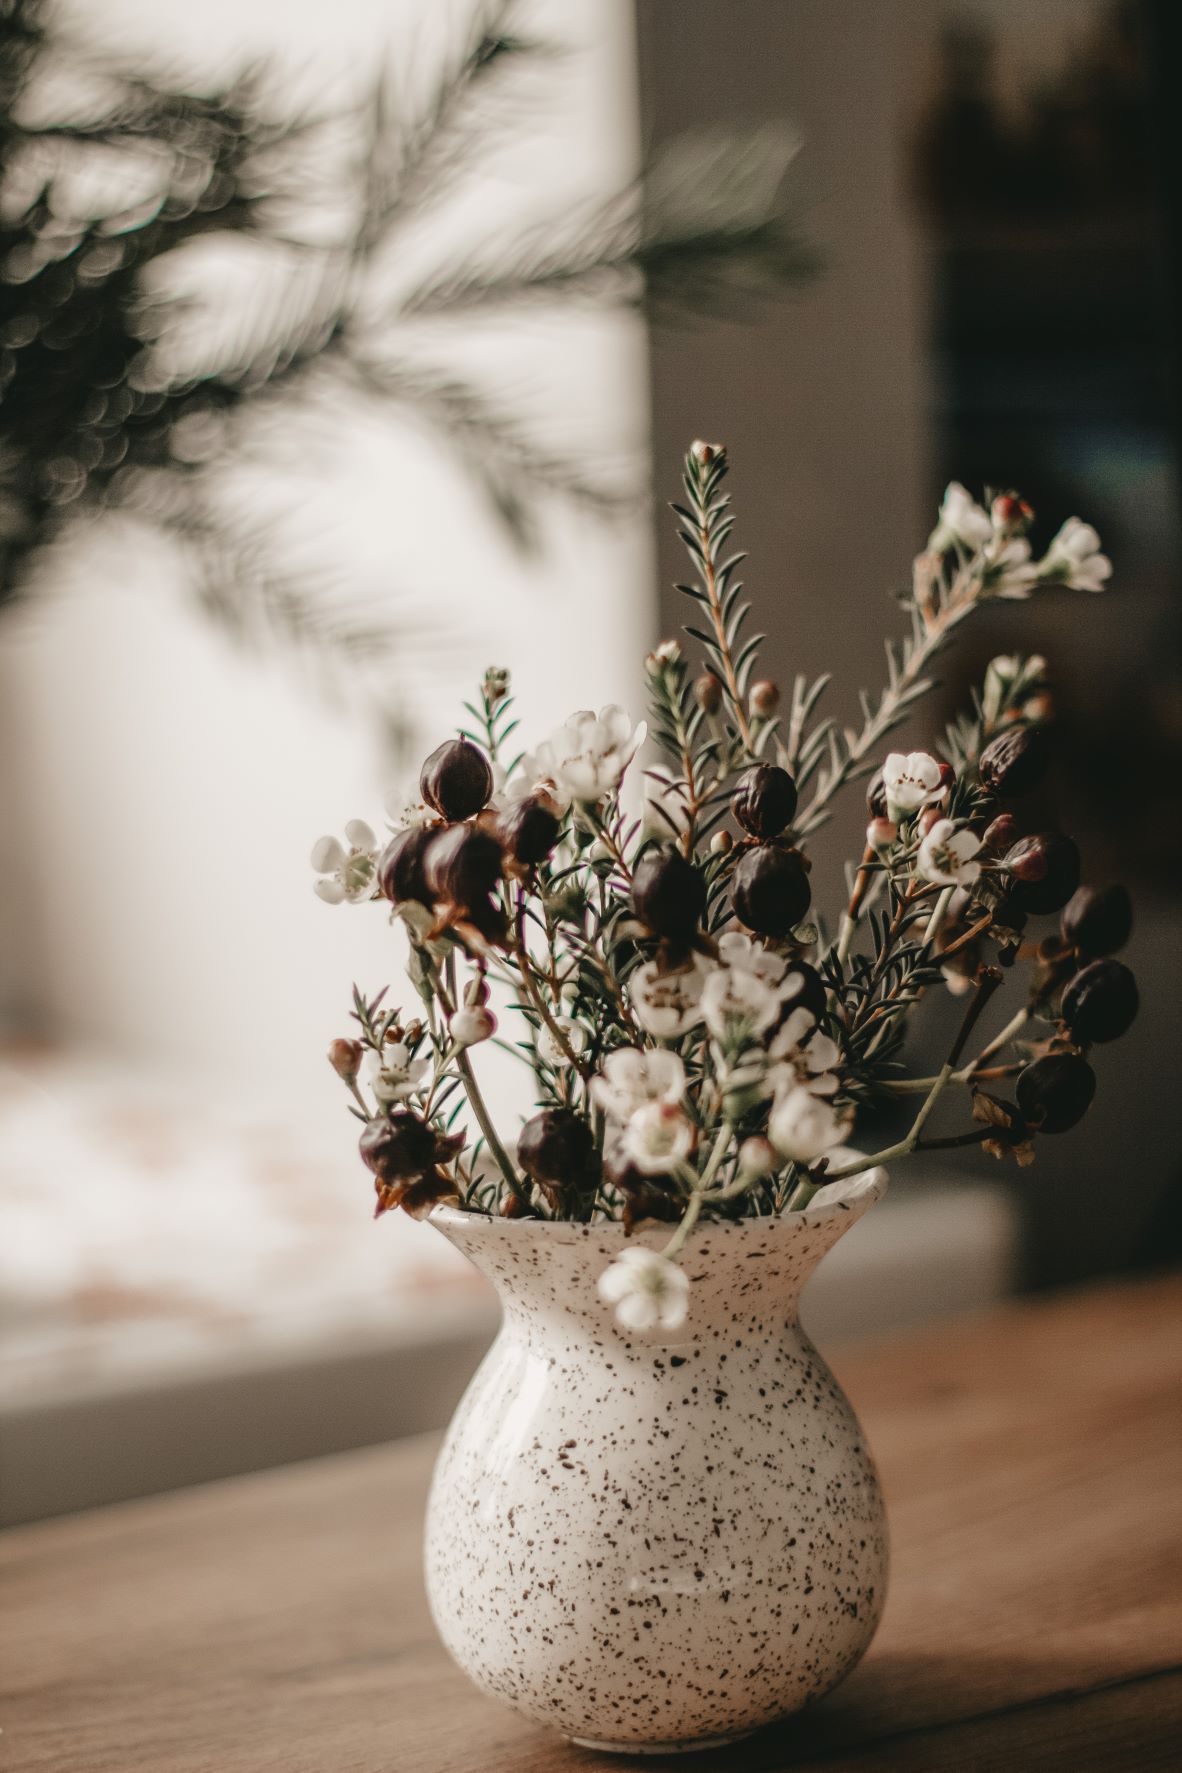 Woody herbs and red berries are displayed in a cream coloured vase on top of a wood table.